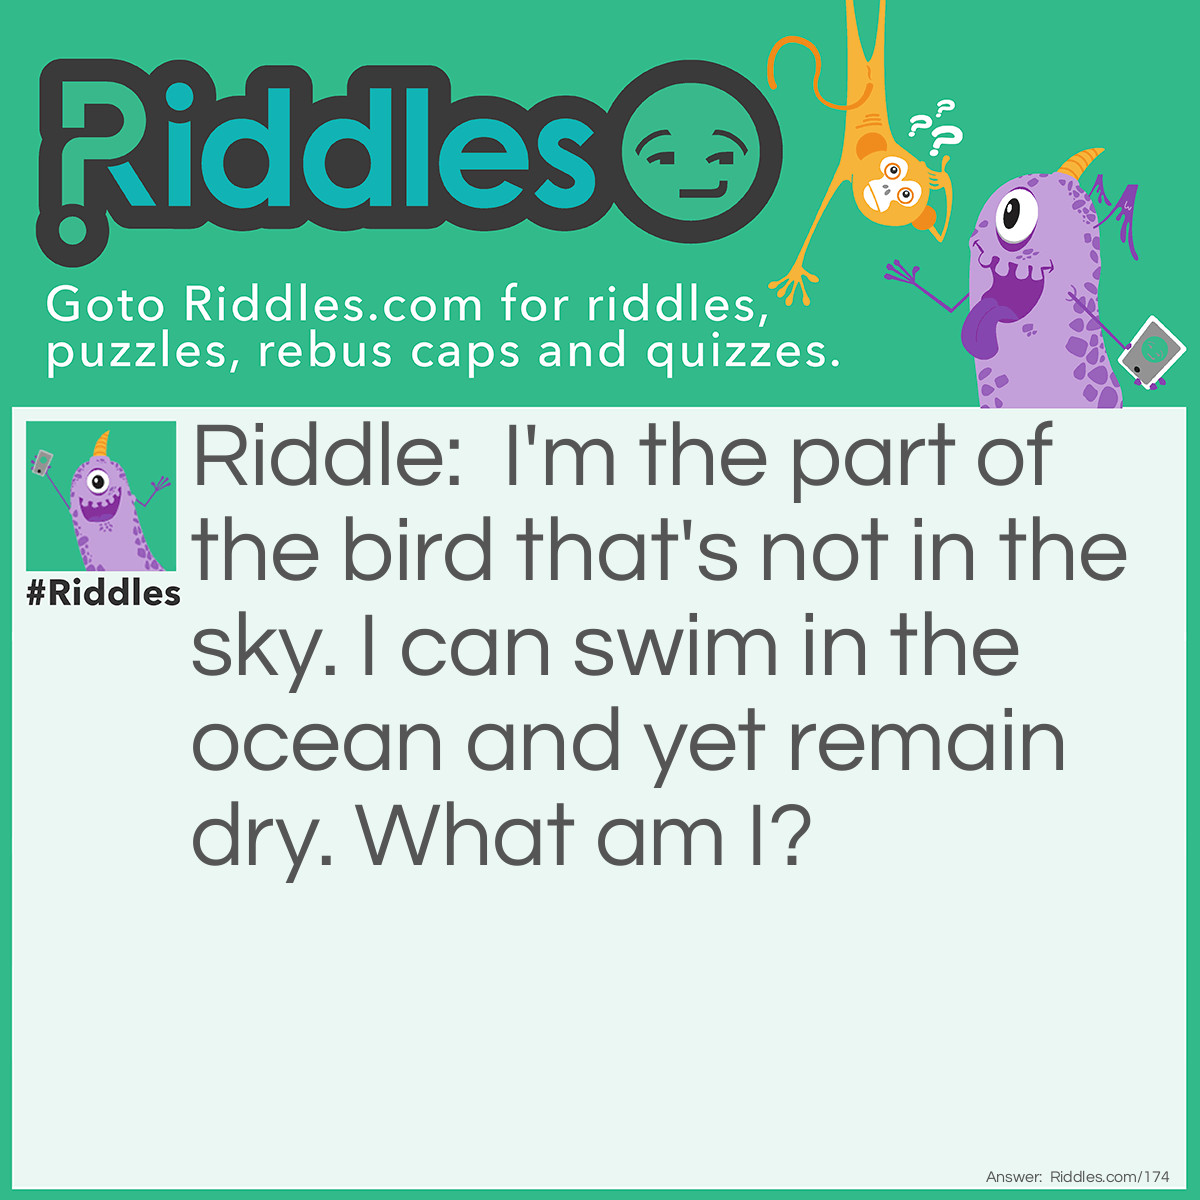 Riddle: I'm the part of the bird that's not in the sky. I can swim in the ocean and yet remain dry. What am I? Answer: A shadow.